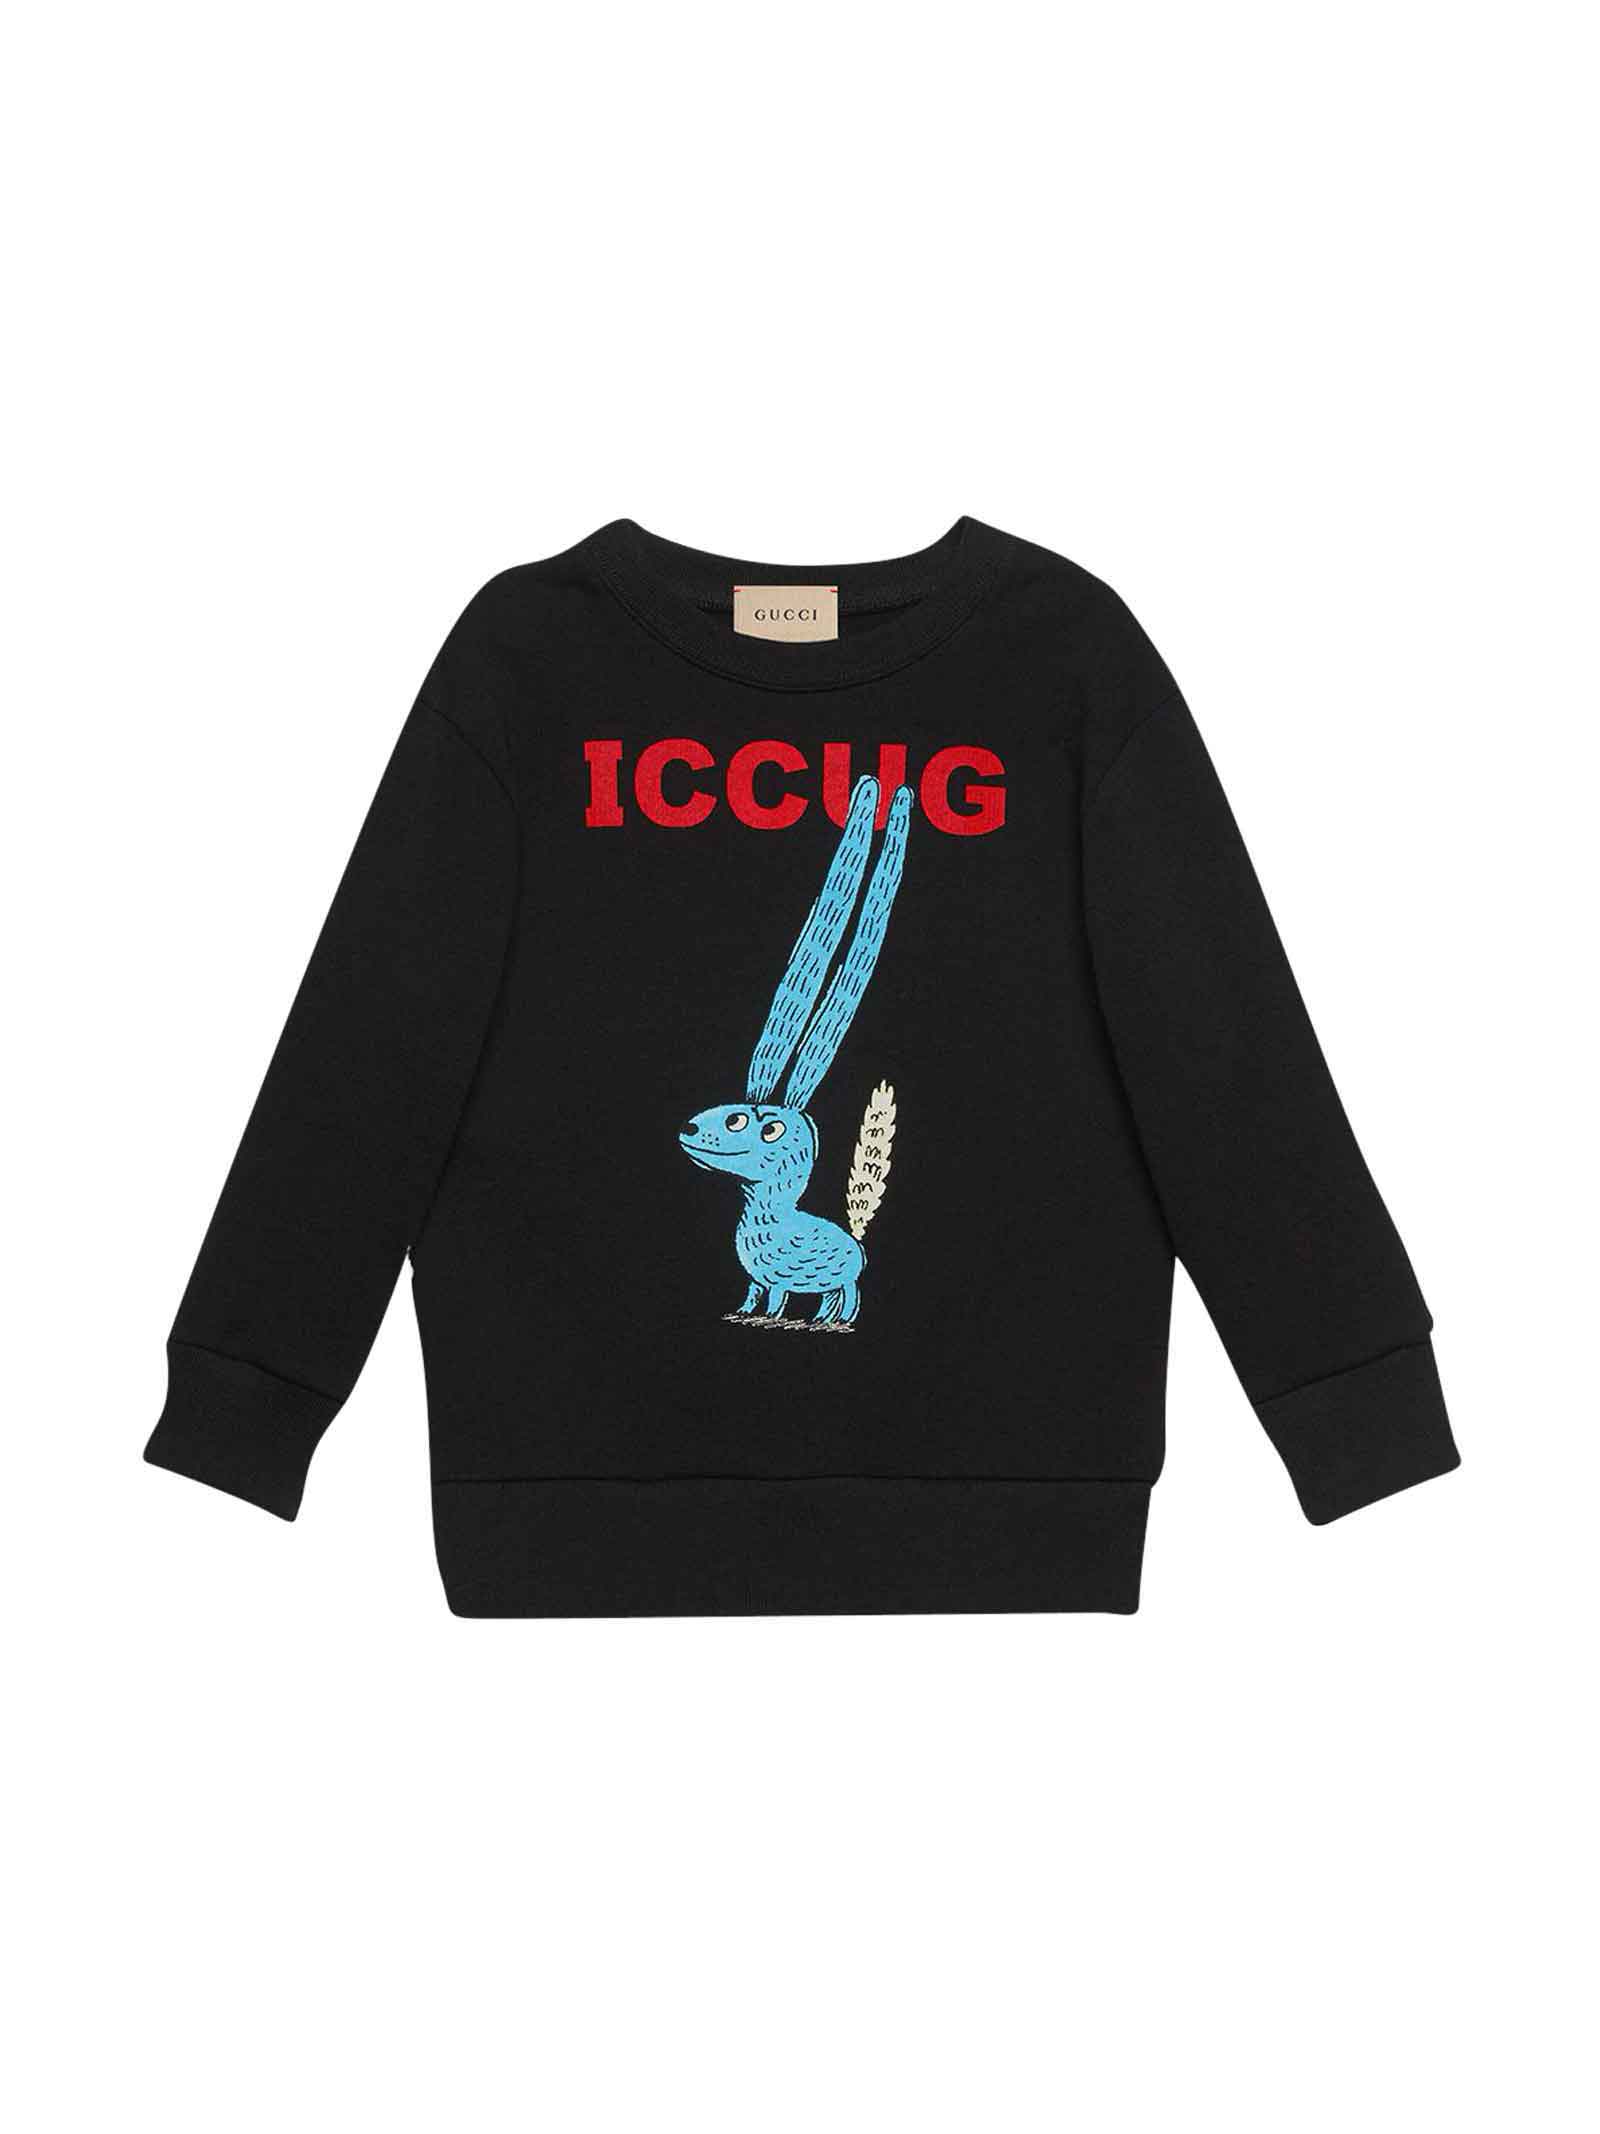 Gucci Black Sweatshirt With Frontal Colored Press, Round Neck And Long Sleeve